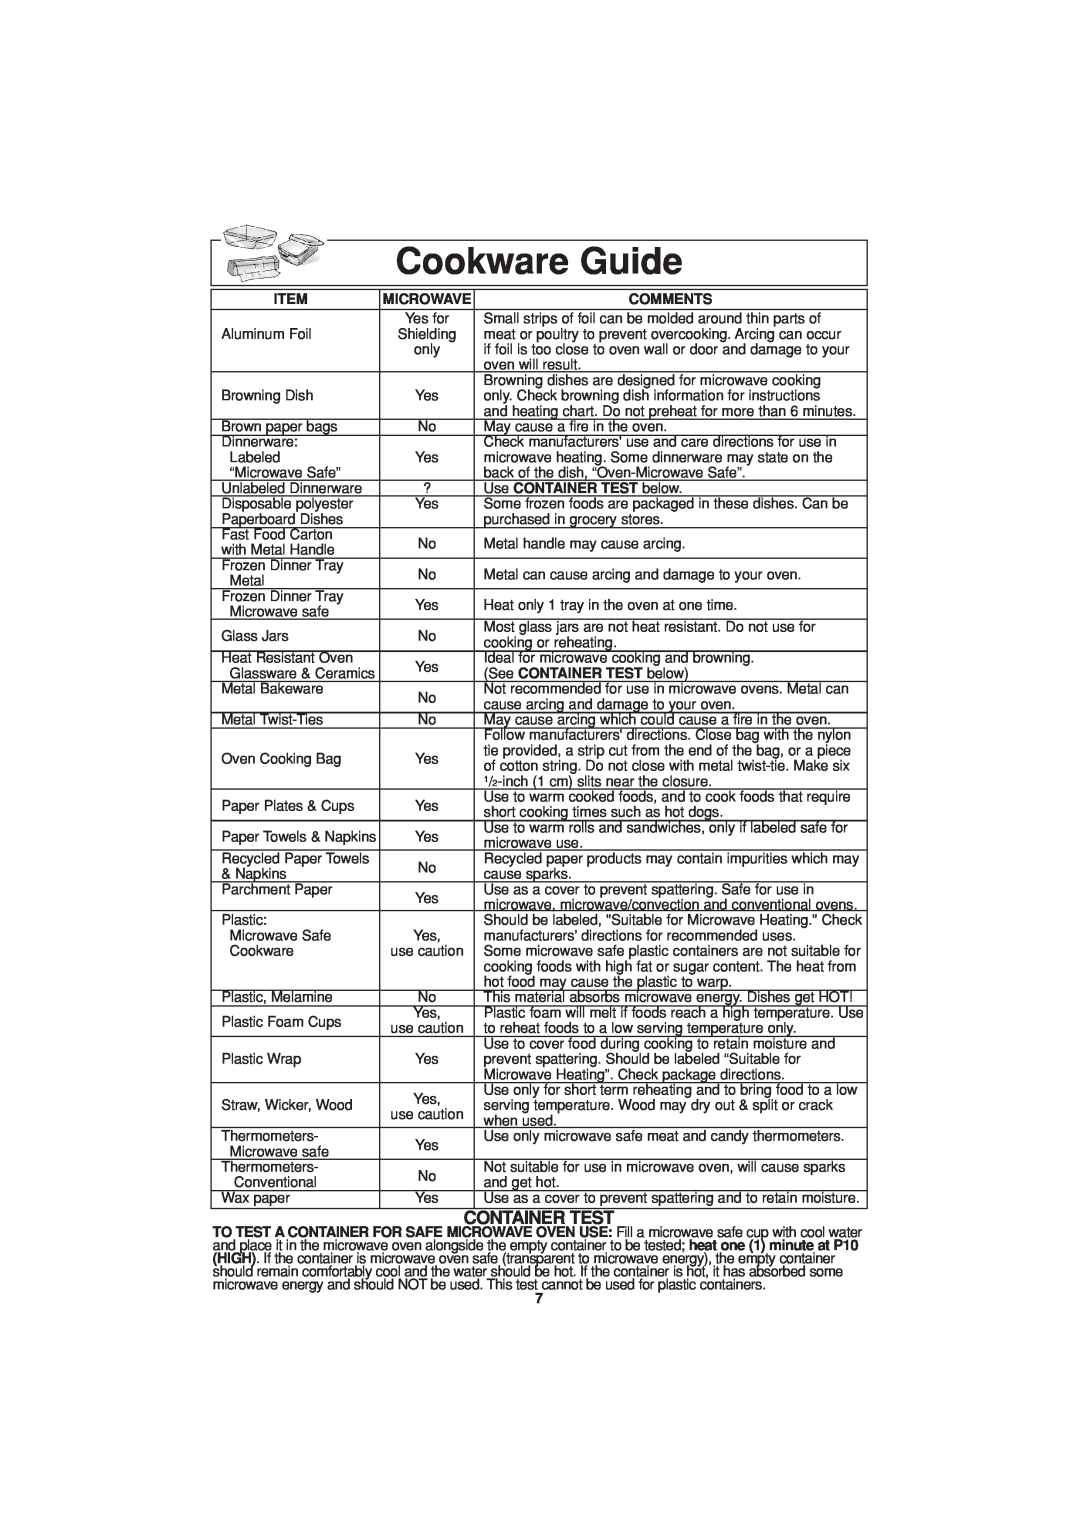 Panasonic NN-H634, NN-H644 important safety instructions Cookware Guide, Container Test 